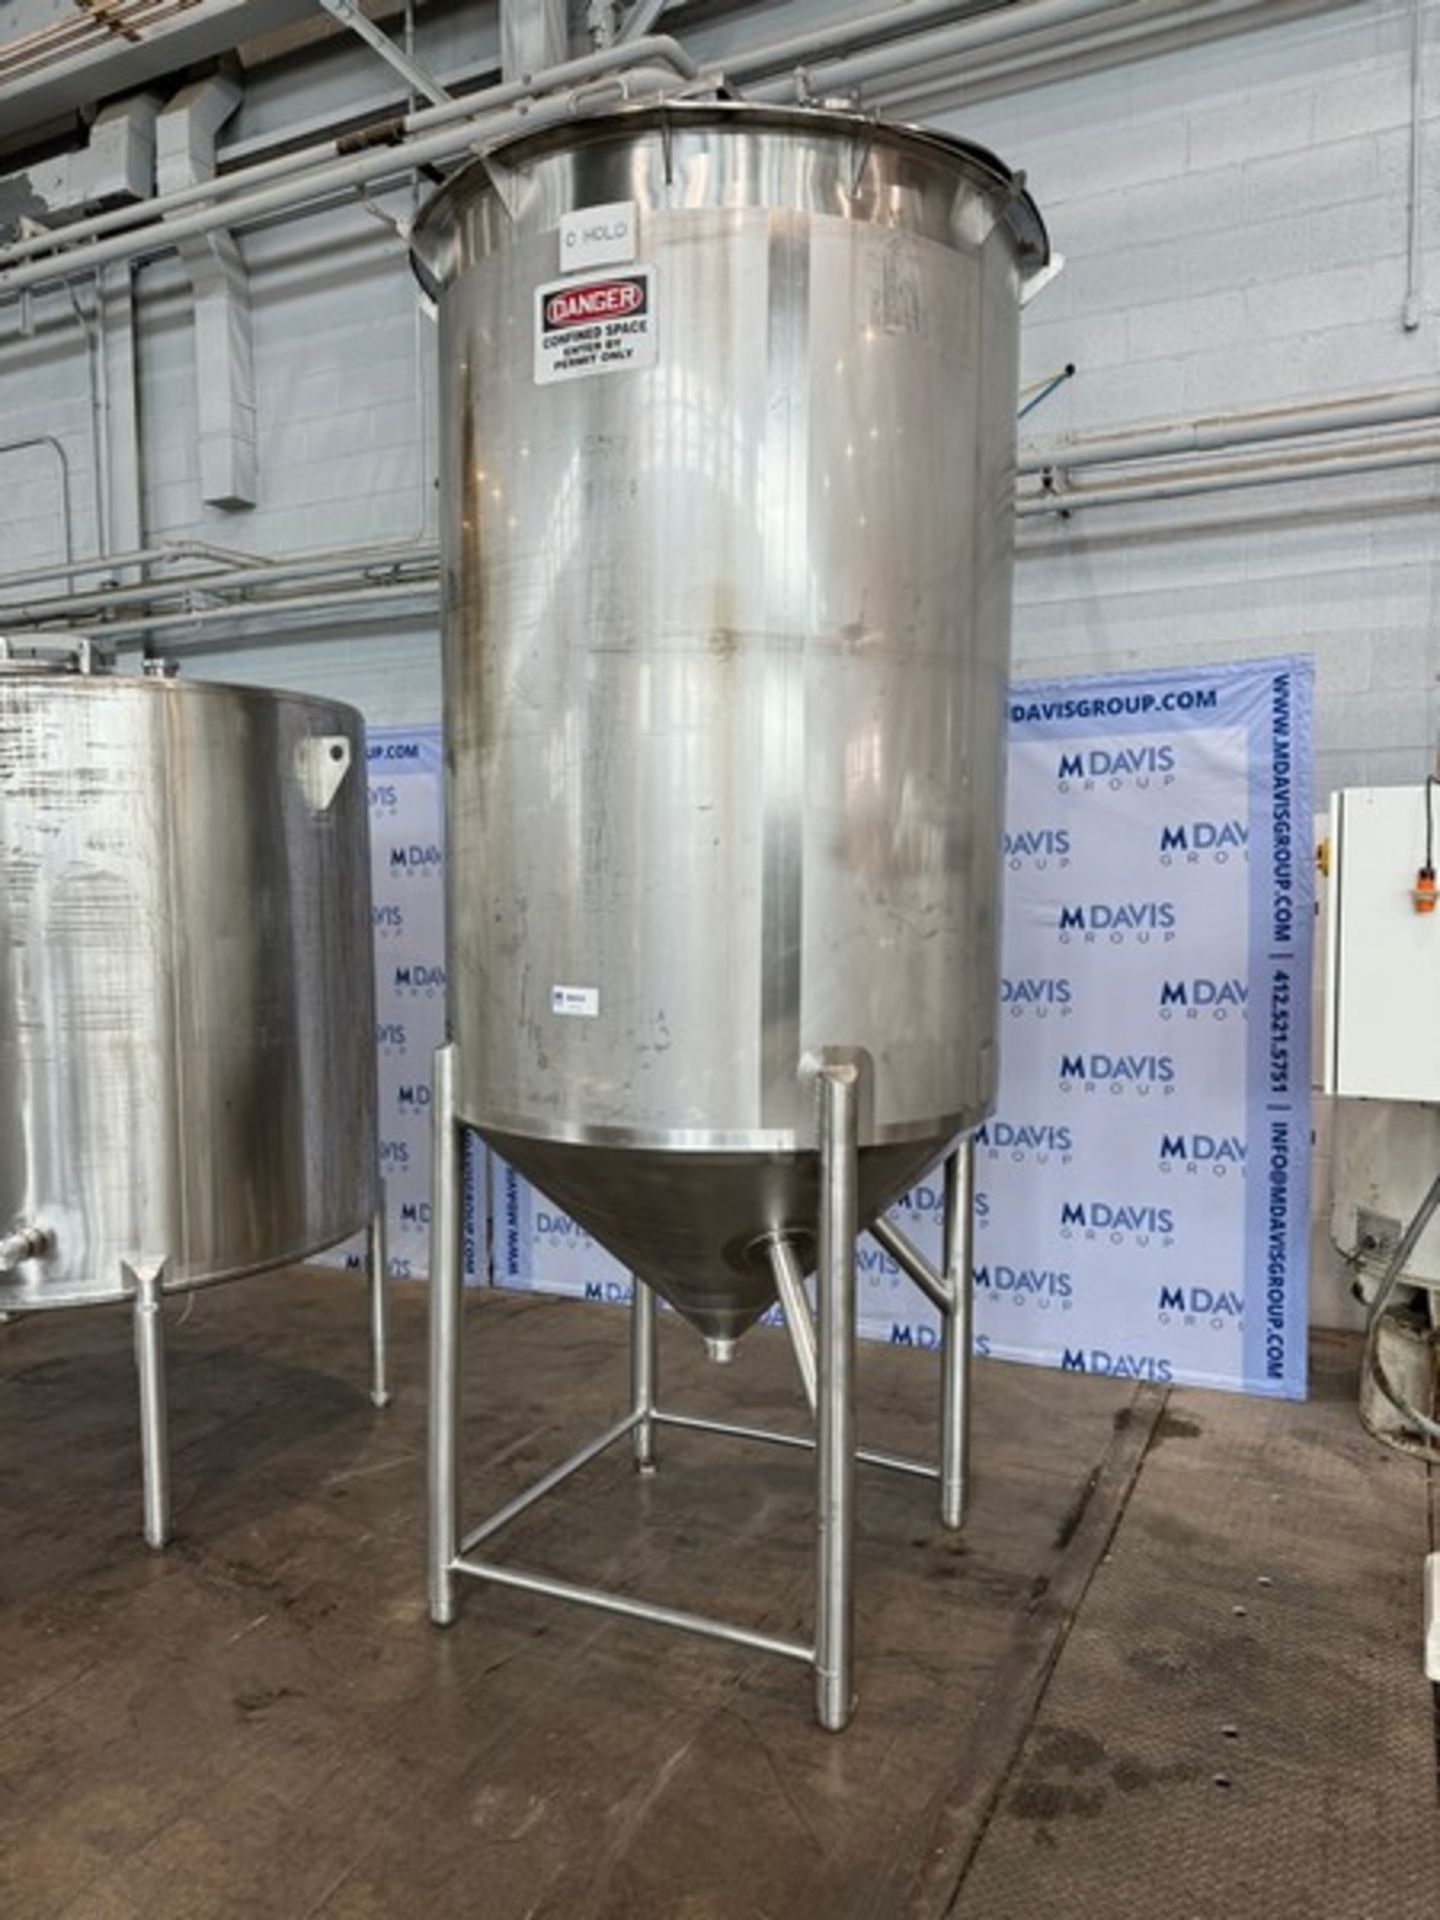 Walker 600 Gal. S/S Single Wall Tank, M/N CB, S/N 4228, 304 SS, with Cone Bottom, with Aprox. 3"